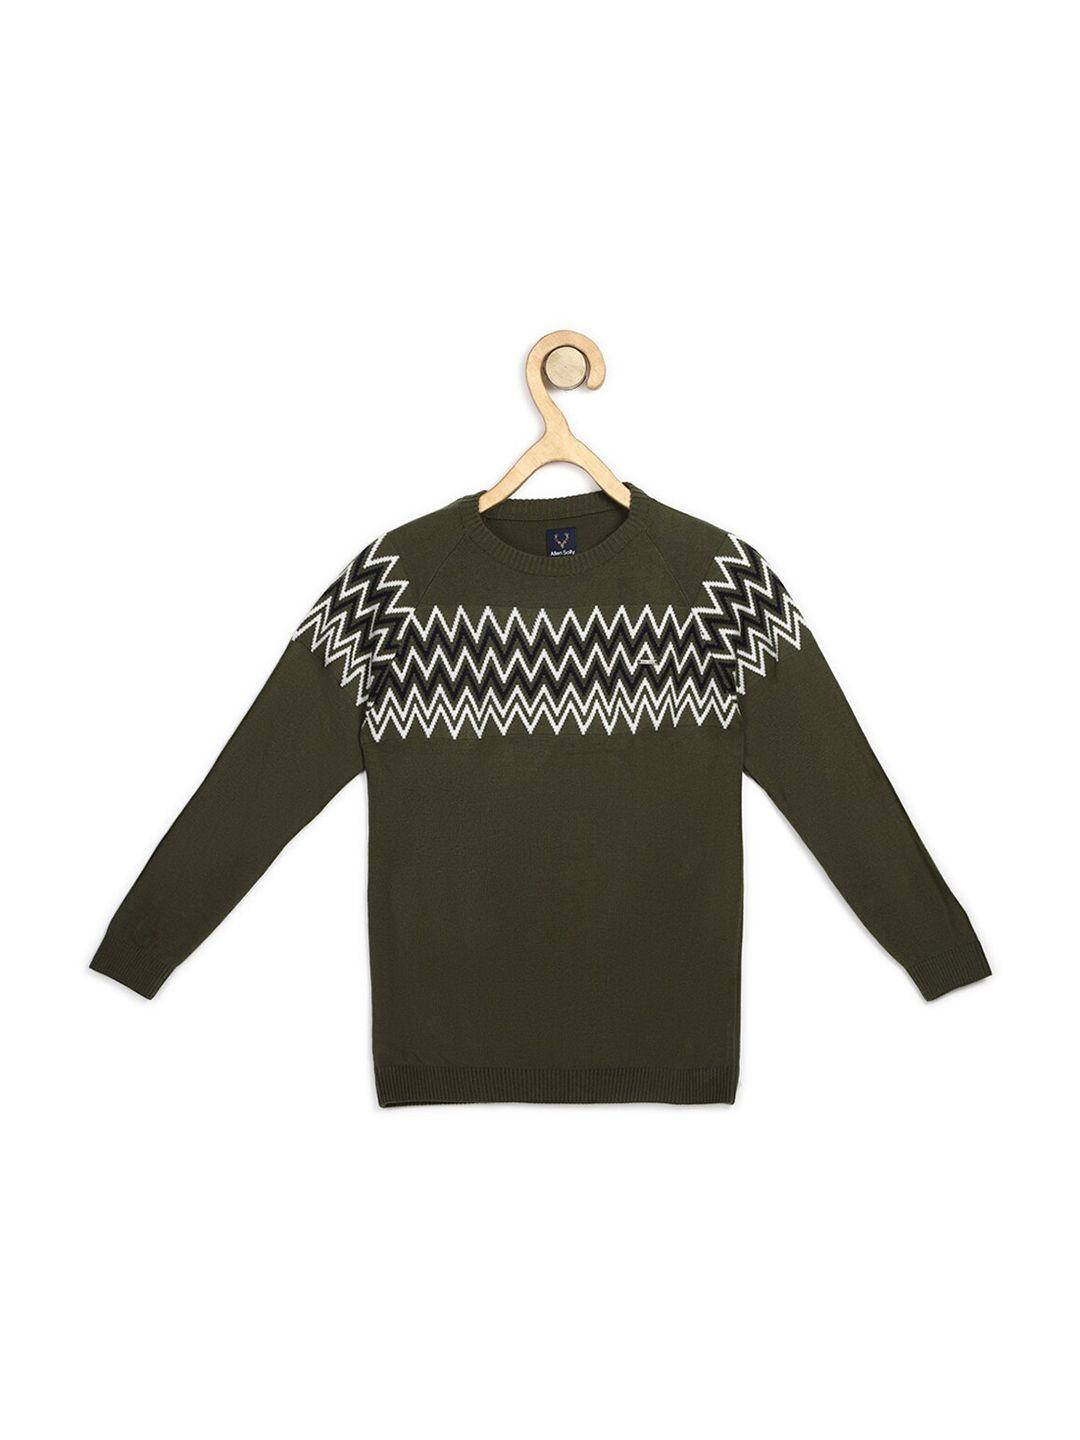 allen solly junior boys olive green printed pullover sweater